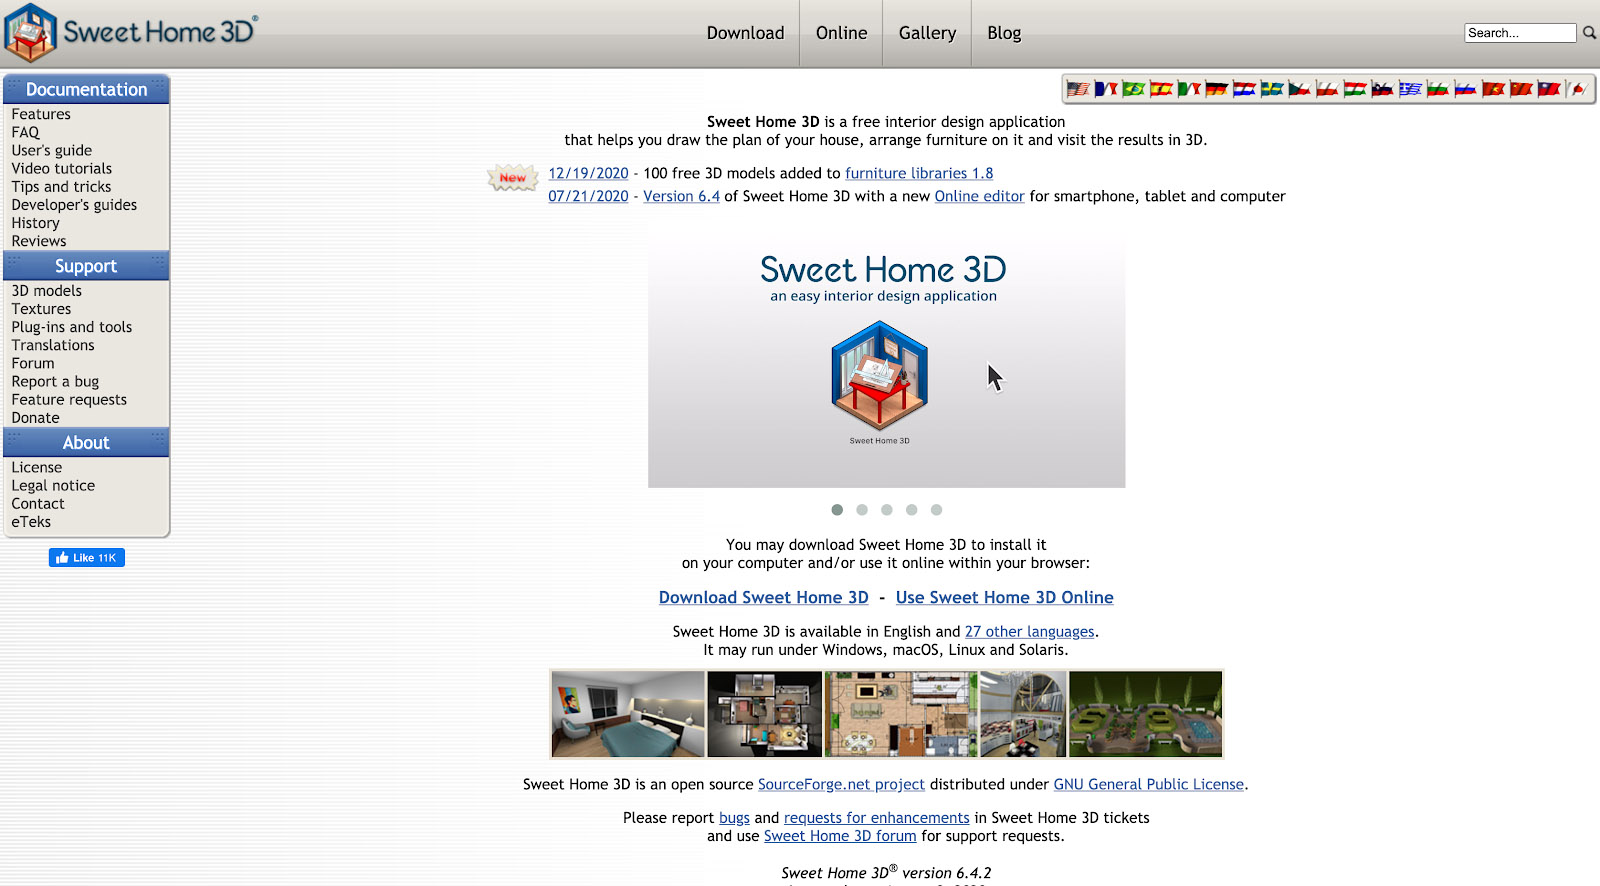 Sweet home 3D home page